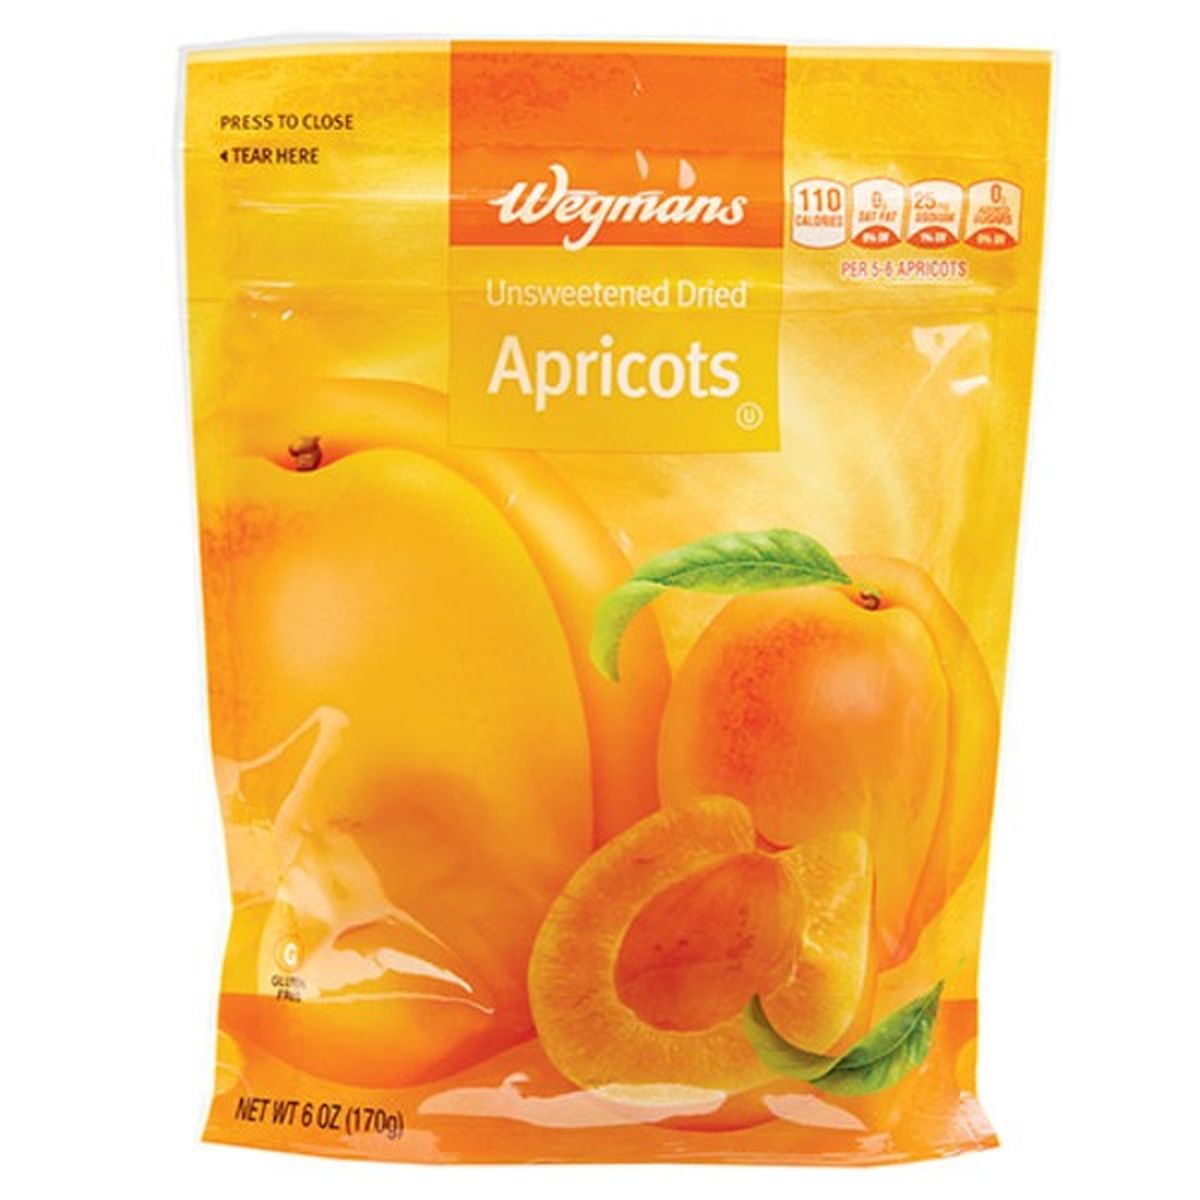 Calories in Wegmans Unsweetened Dried Apricots